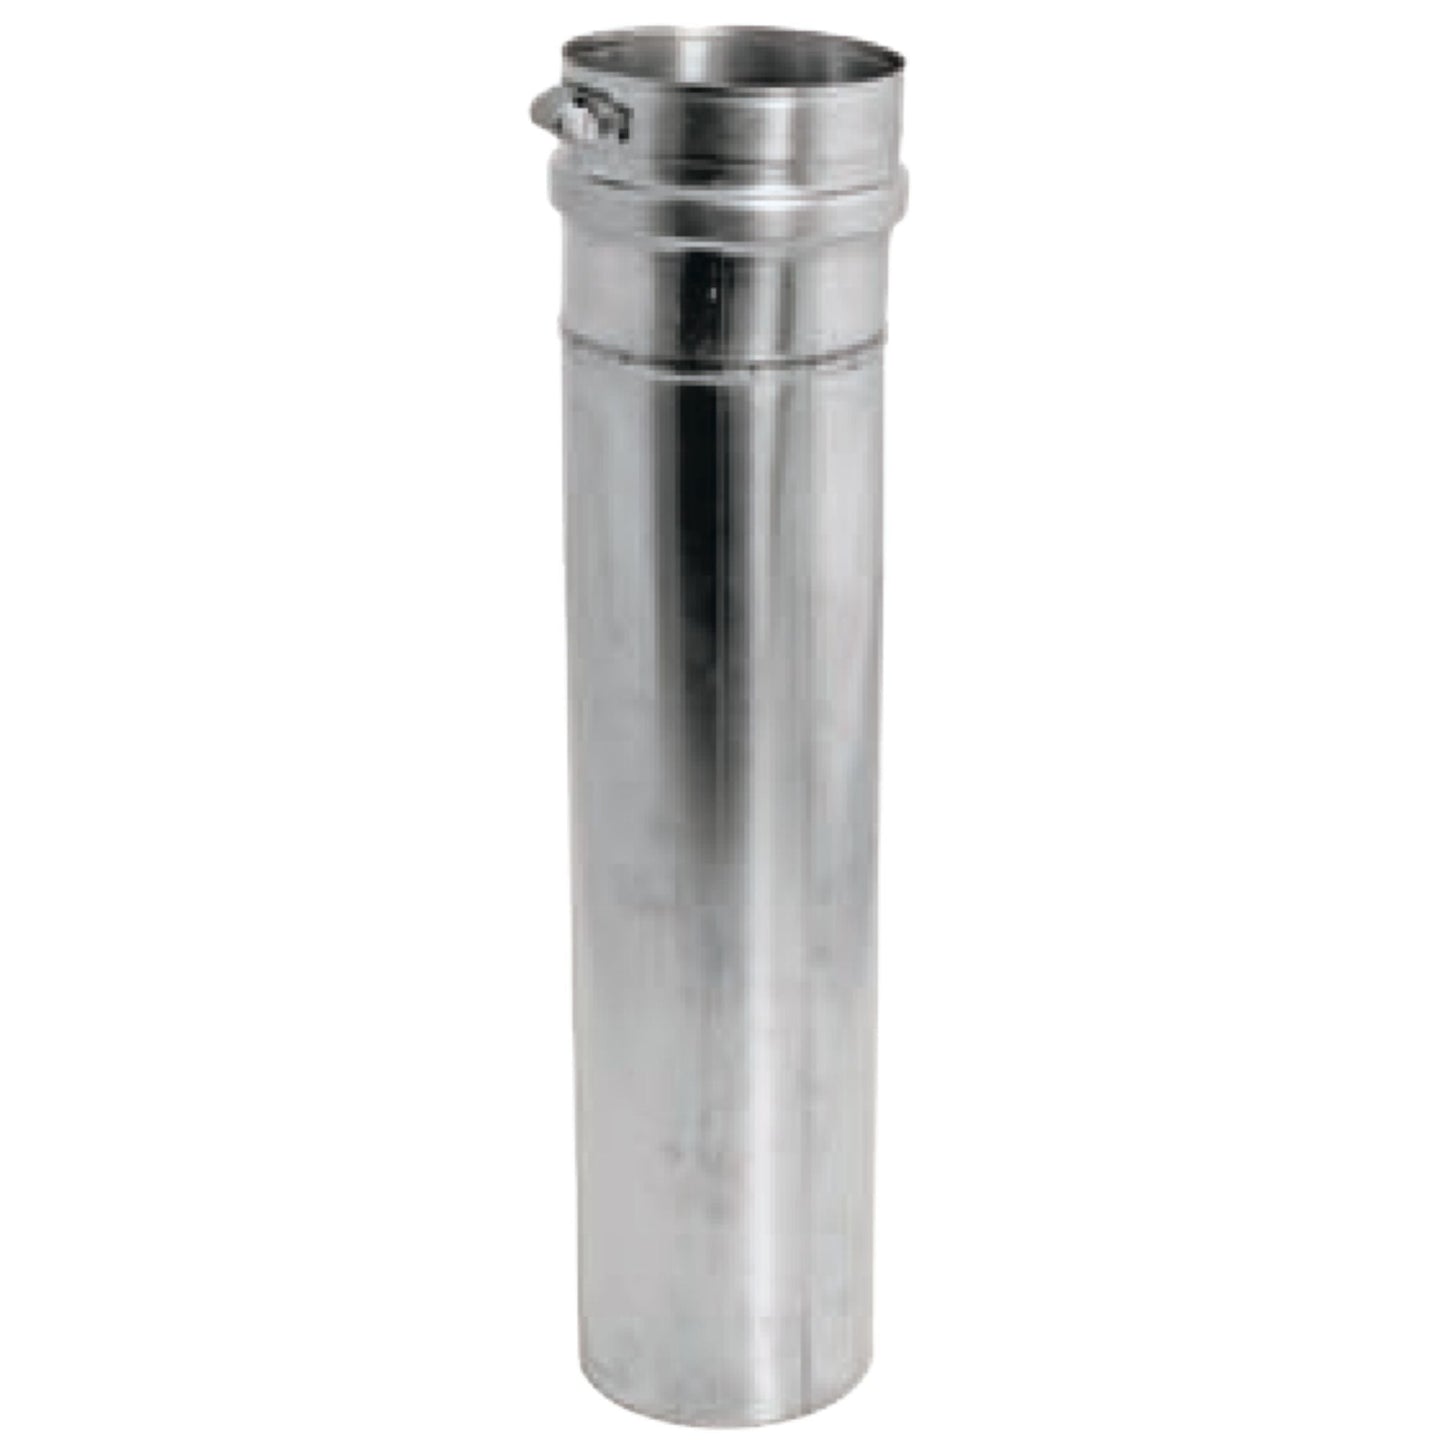 DuraVent FasNSeal 9" 2 Degree 29-4C Stainless Steel Adjustable Vent Length